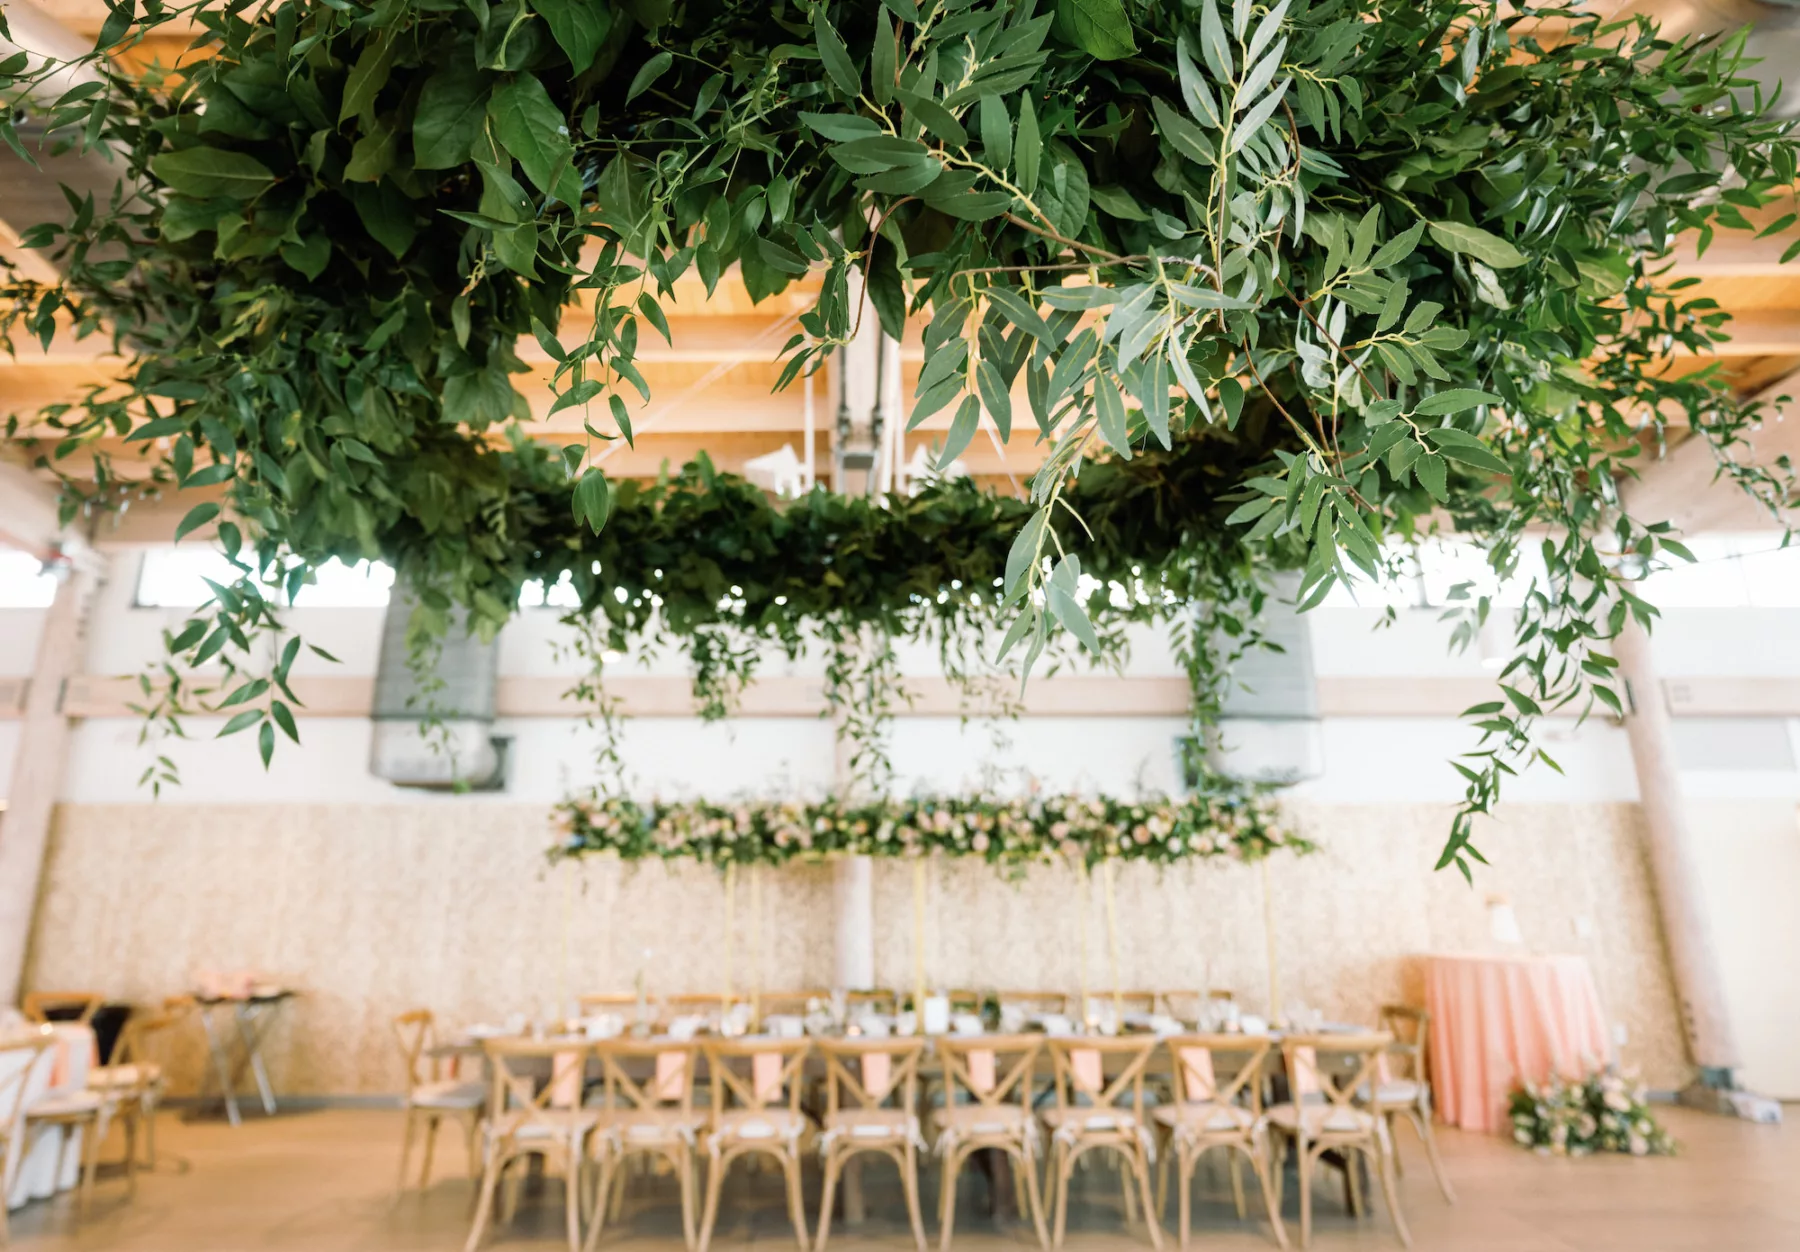 Round Greenery Chandelier for Romantic Pink and Blue Wedding Reception Inspiration | Tampa Bay Planner Wilder Mind Events | Venue Tampa River Center